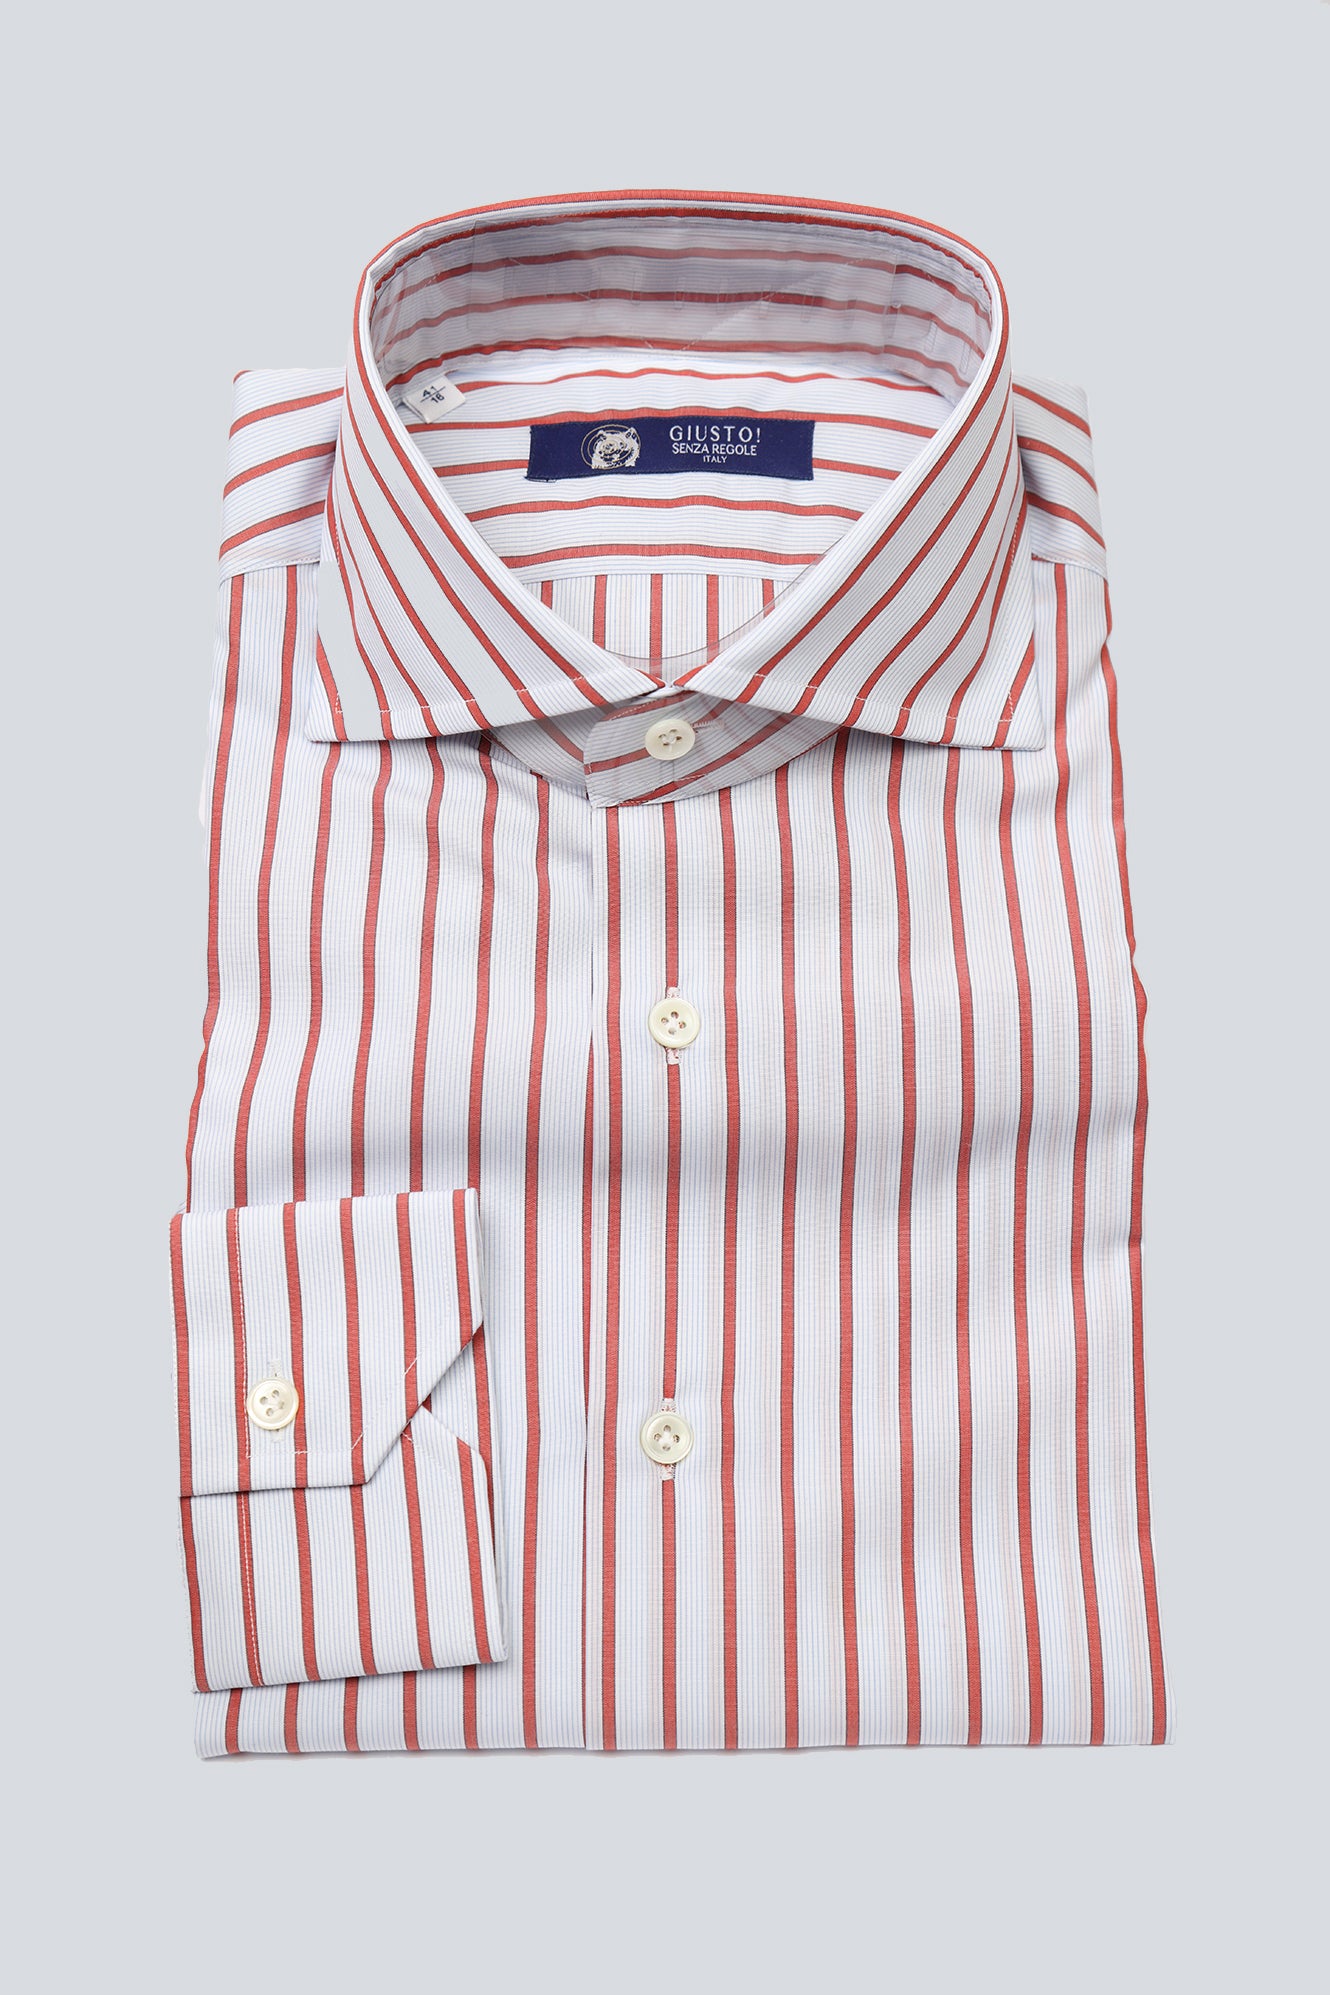 Off White and Indian Red Thousand Stripe Shirt